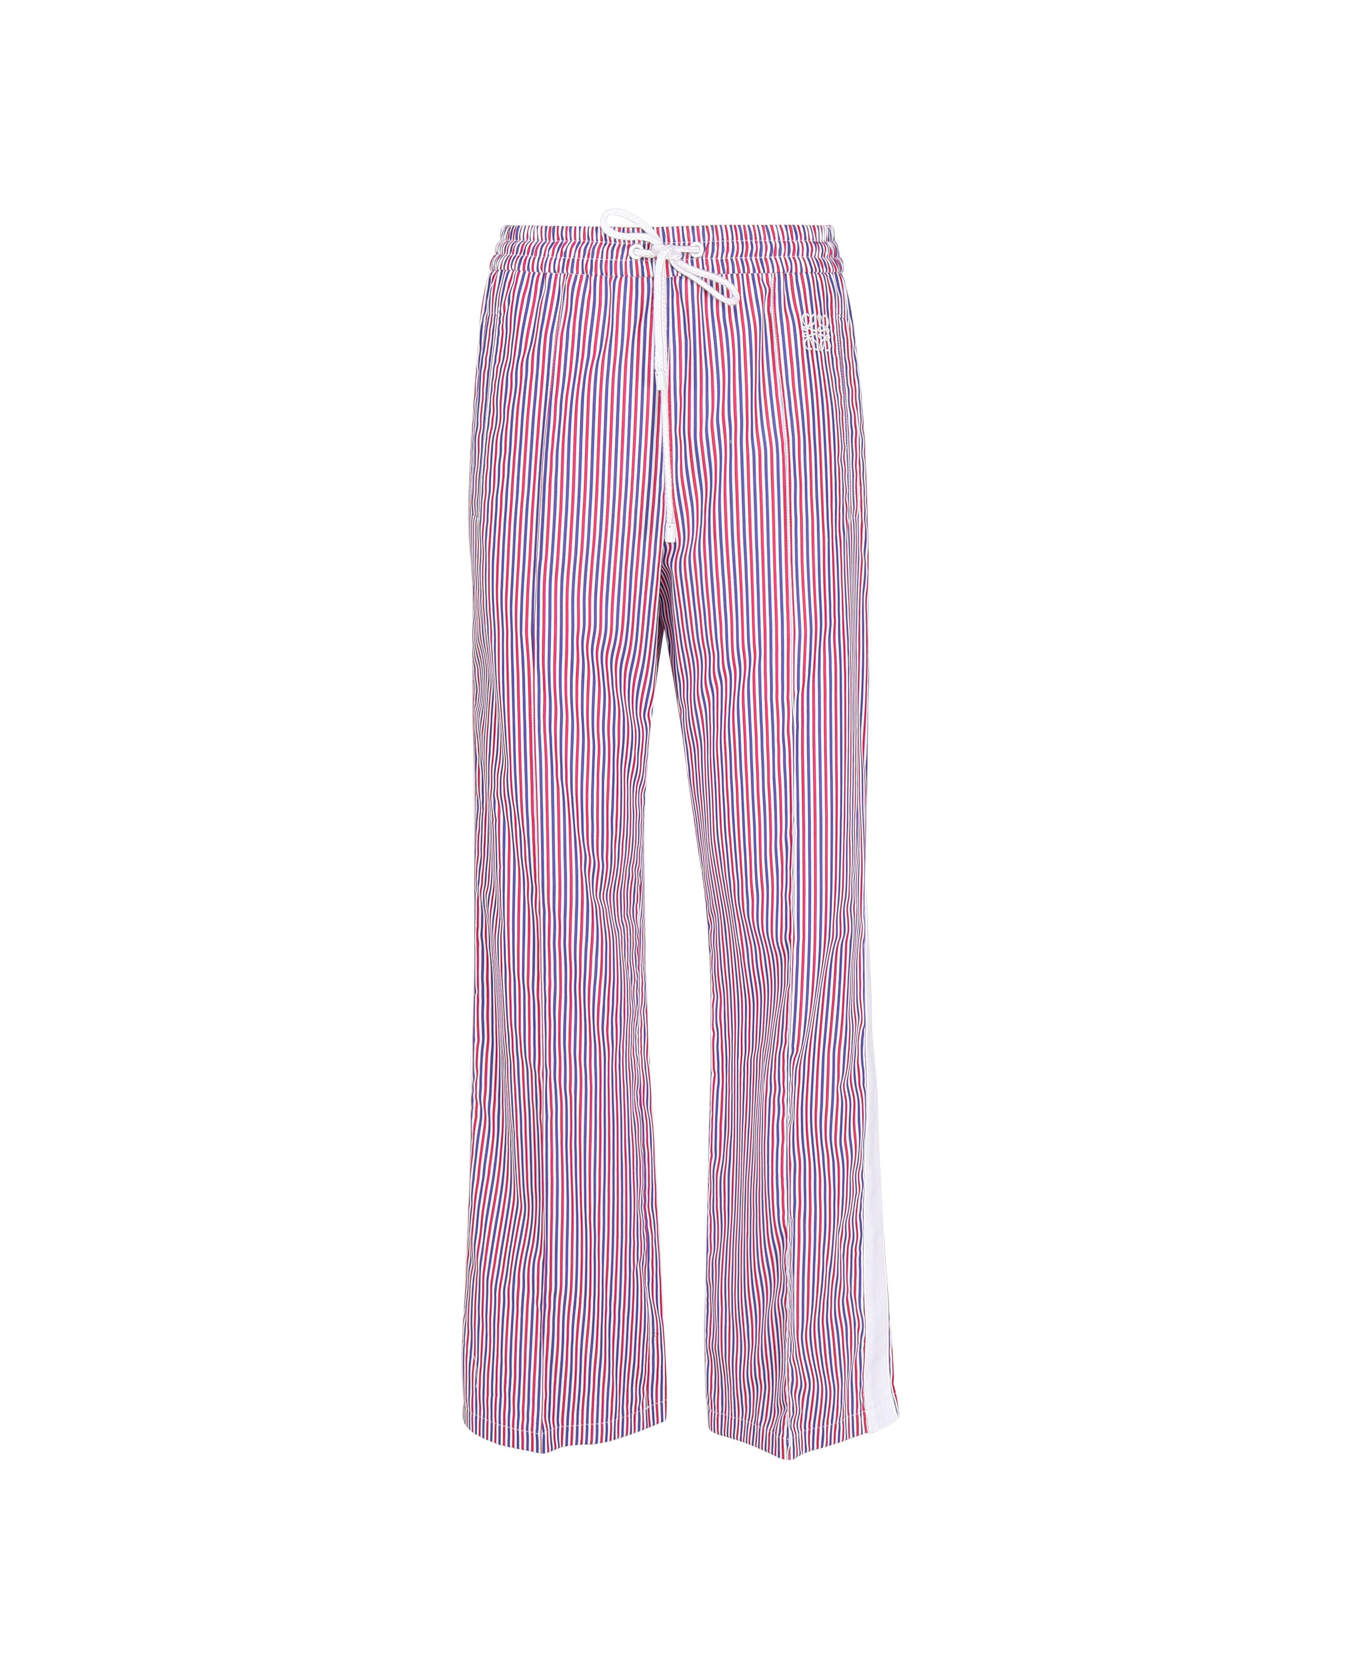 Loewe Striped Cotton Tracksuit Trousers - Blue/red/white